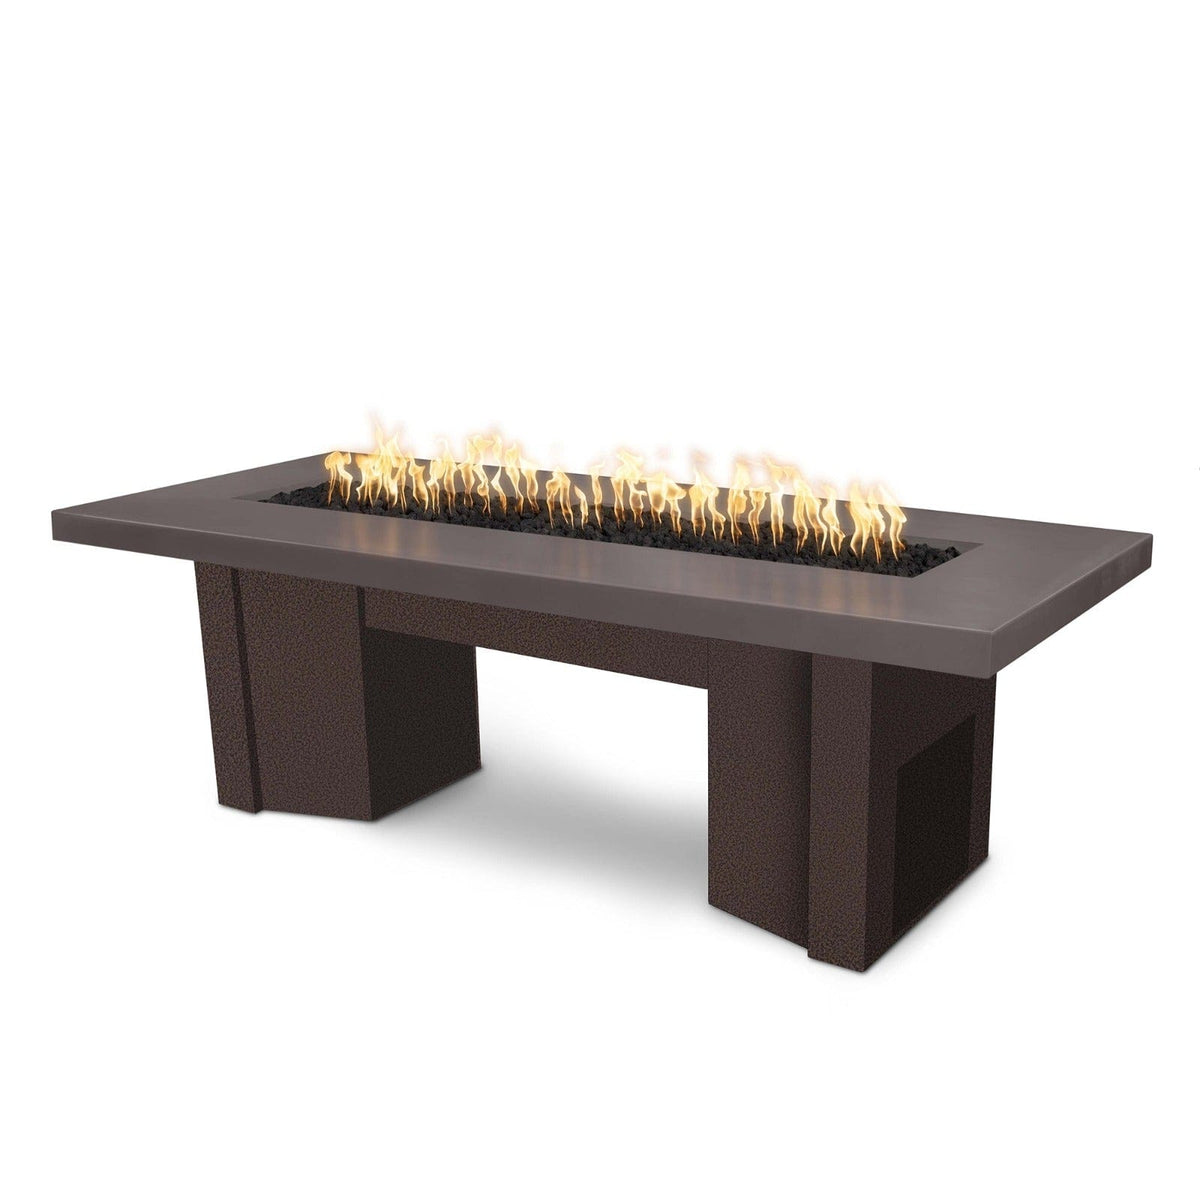 The Outdoor Plus Fire Features Chestnut (-CST) / Copper Vein Powder Coated Steel (-CPV) The Outdoor Plus 60&quot; Alameda Fire Table Smooth Concrete in Natural Gas - 110V Plug &amp; Play Electronic Ignition / OPT-ALMGFRC60EKIT-NG